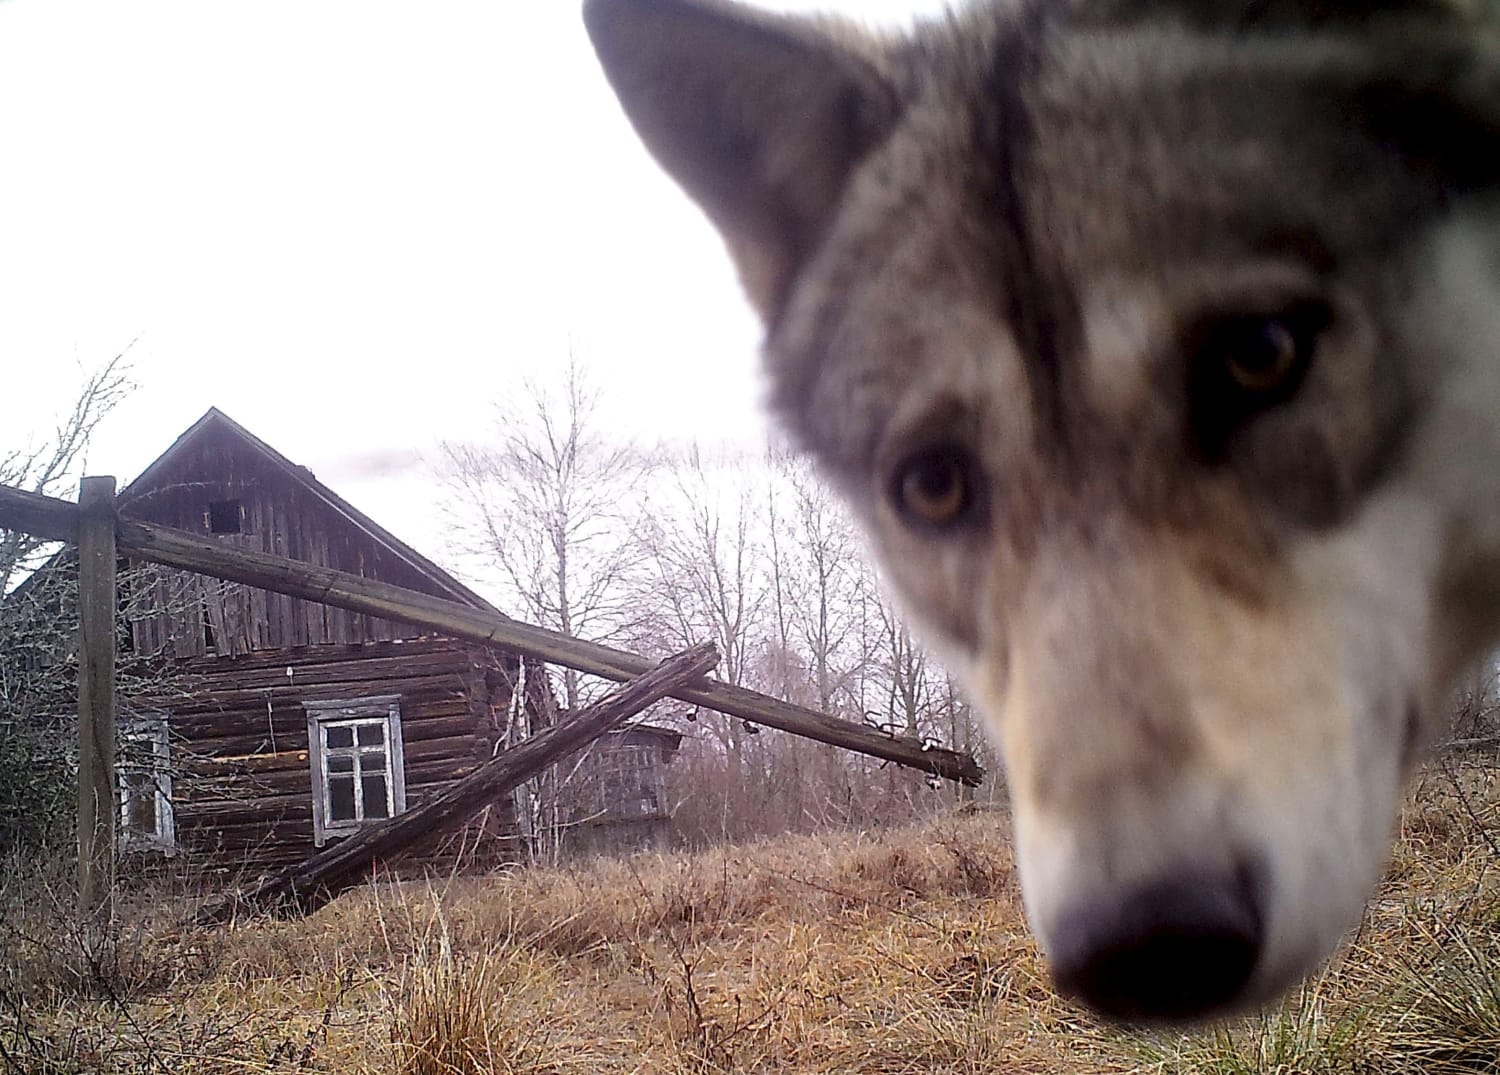 Chernobyl Anniversary: Disaster Exiled Humans, Made Way for Wildlife